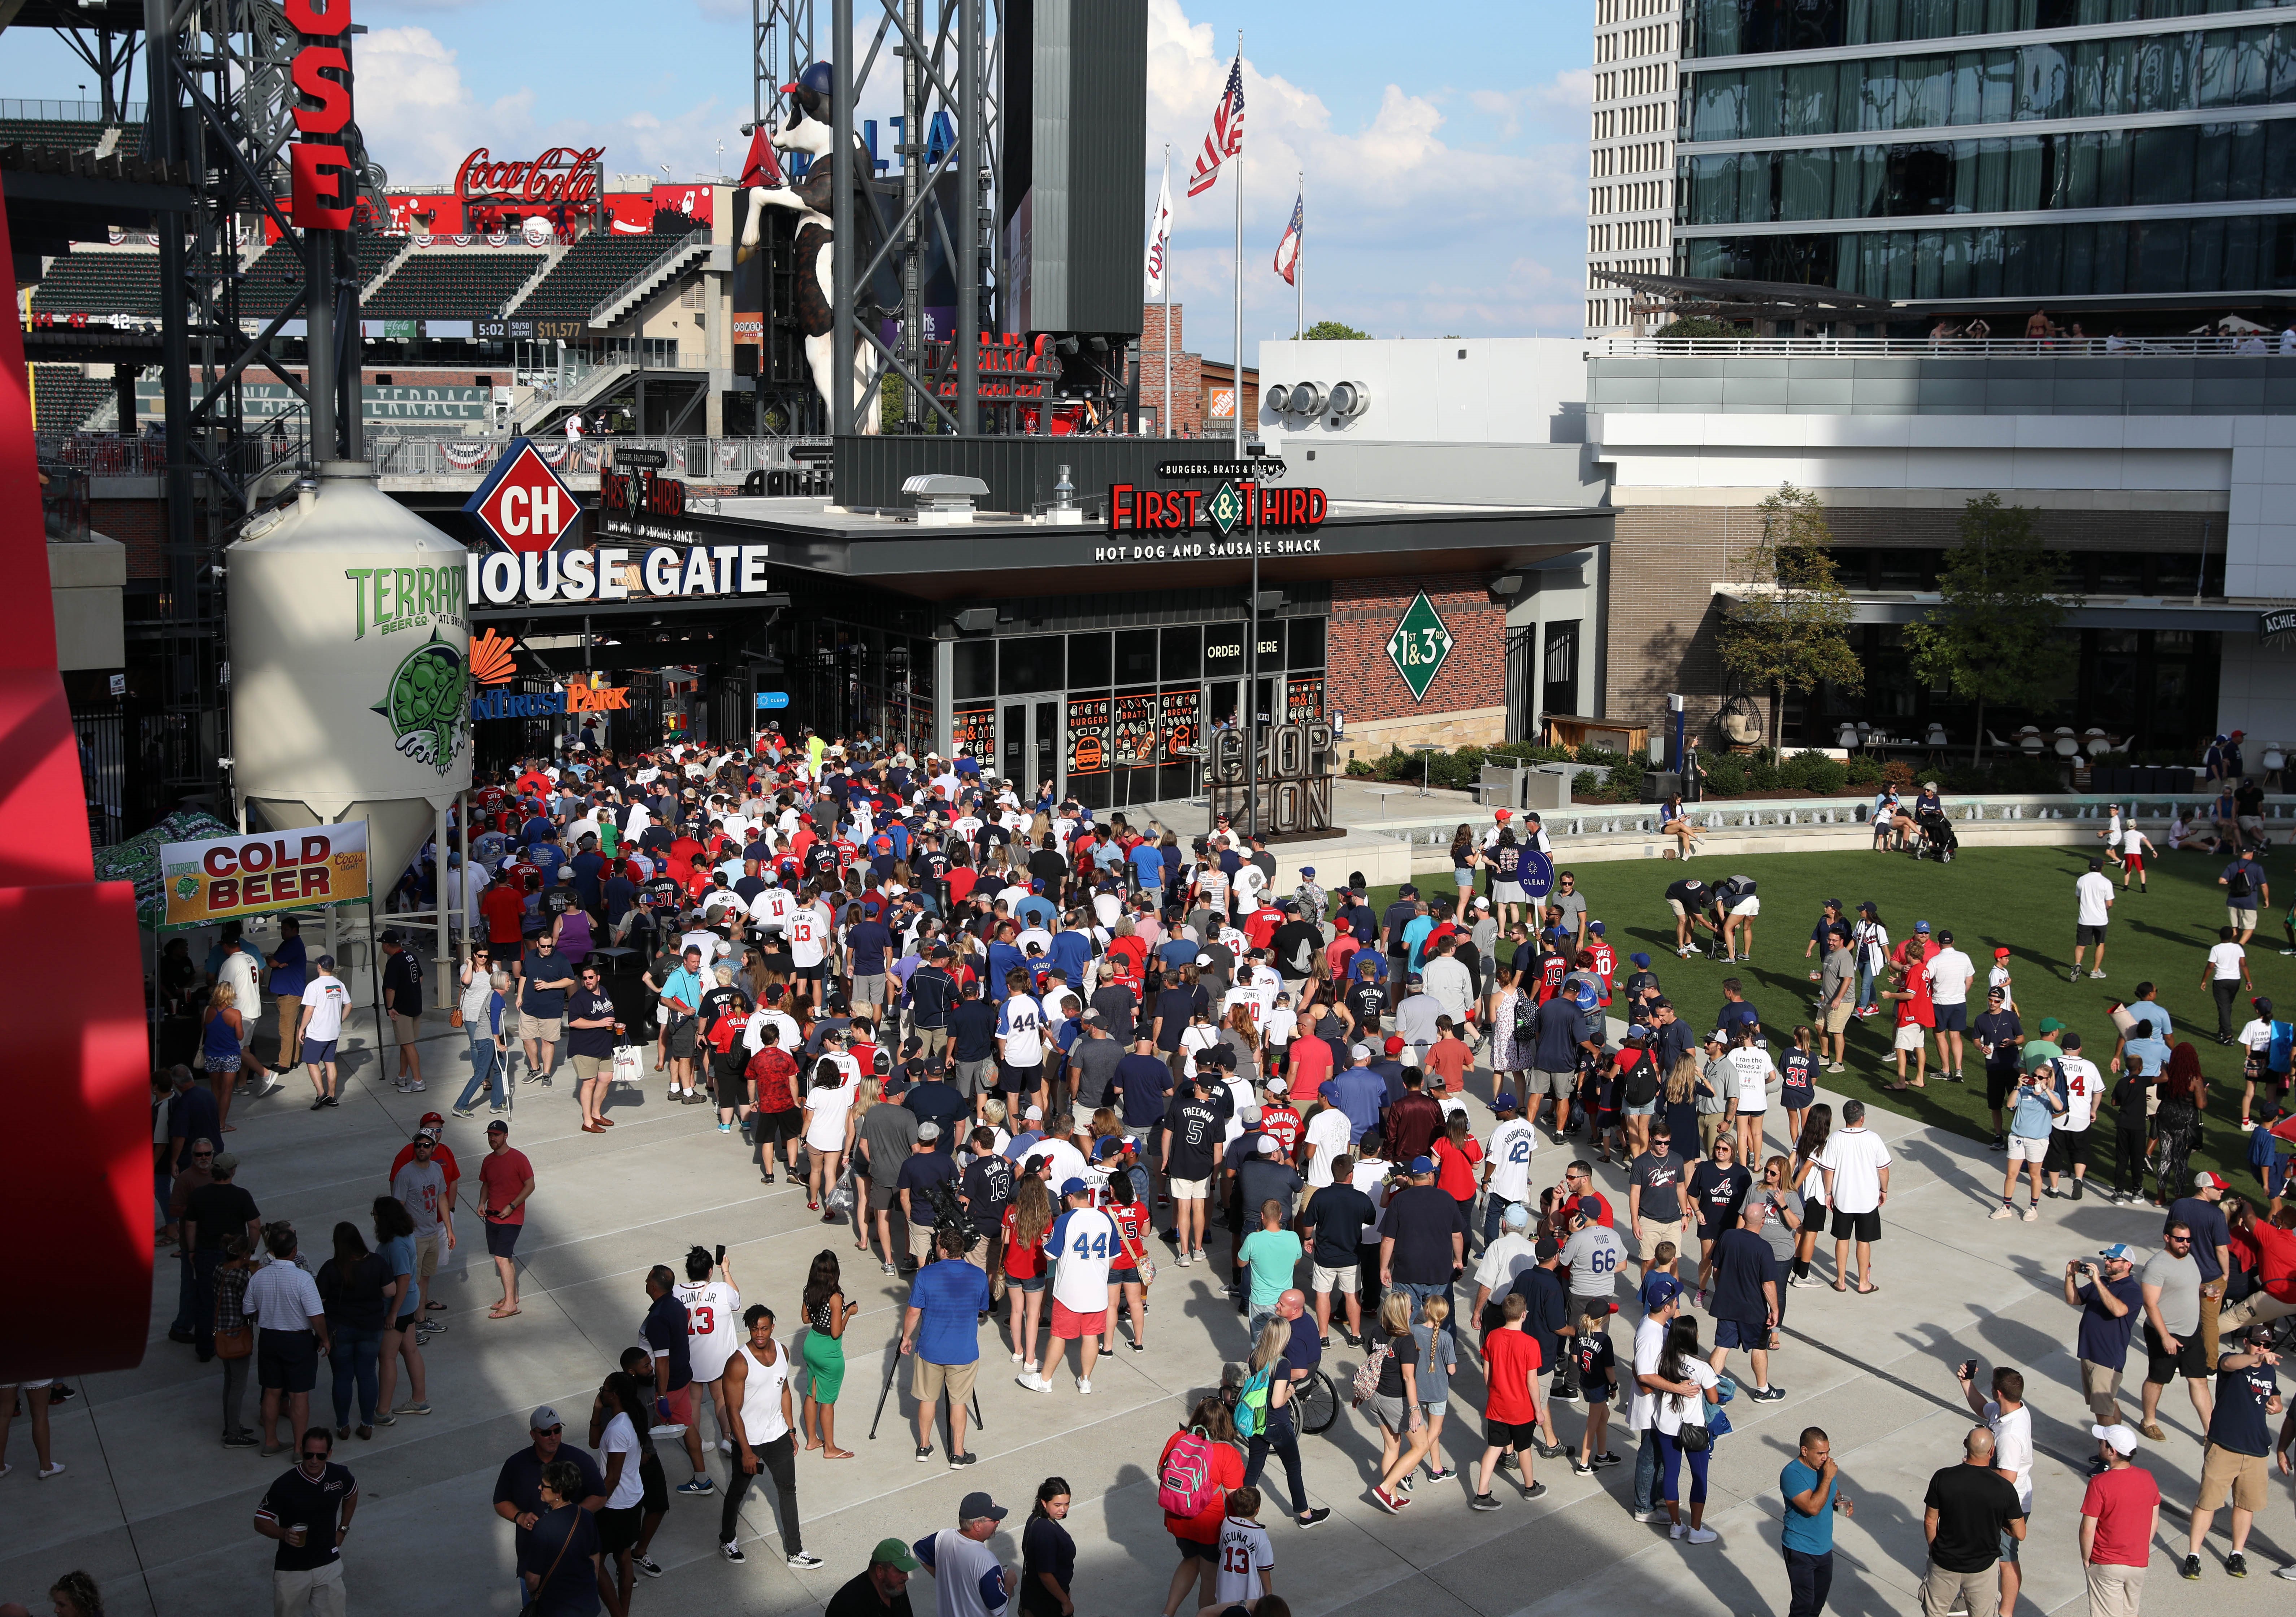 Photos: The scene at the Braves' first playoff game at SunTrust Park